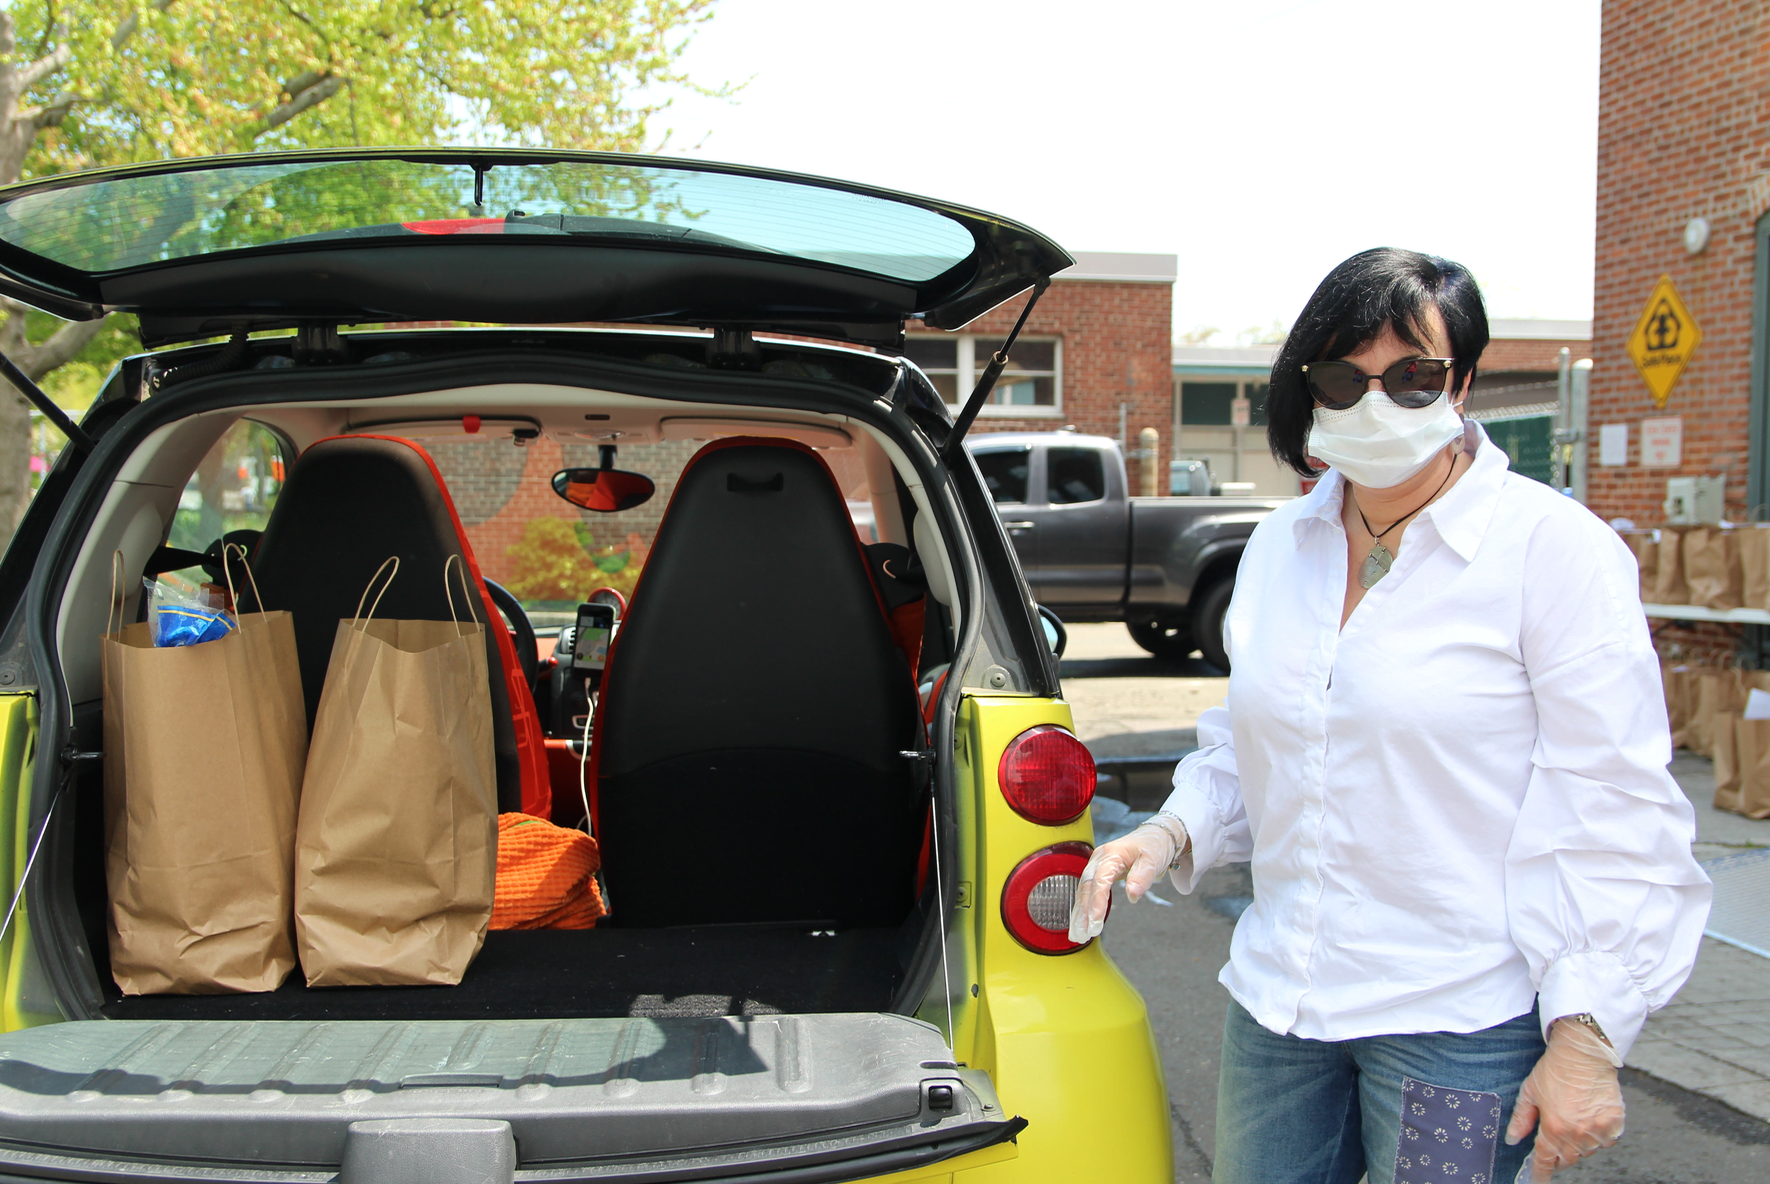 Olga Milstein ready to deliver bags of groceries to homebound seniors. May 15, 2020 Photo: Leslie Yager